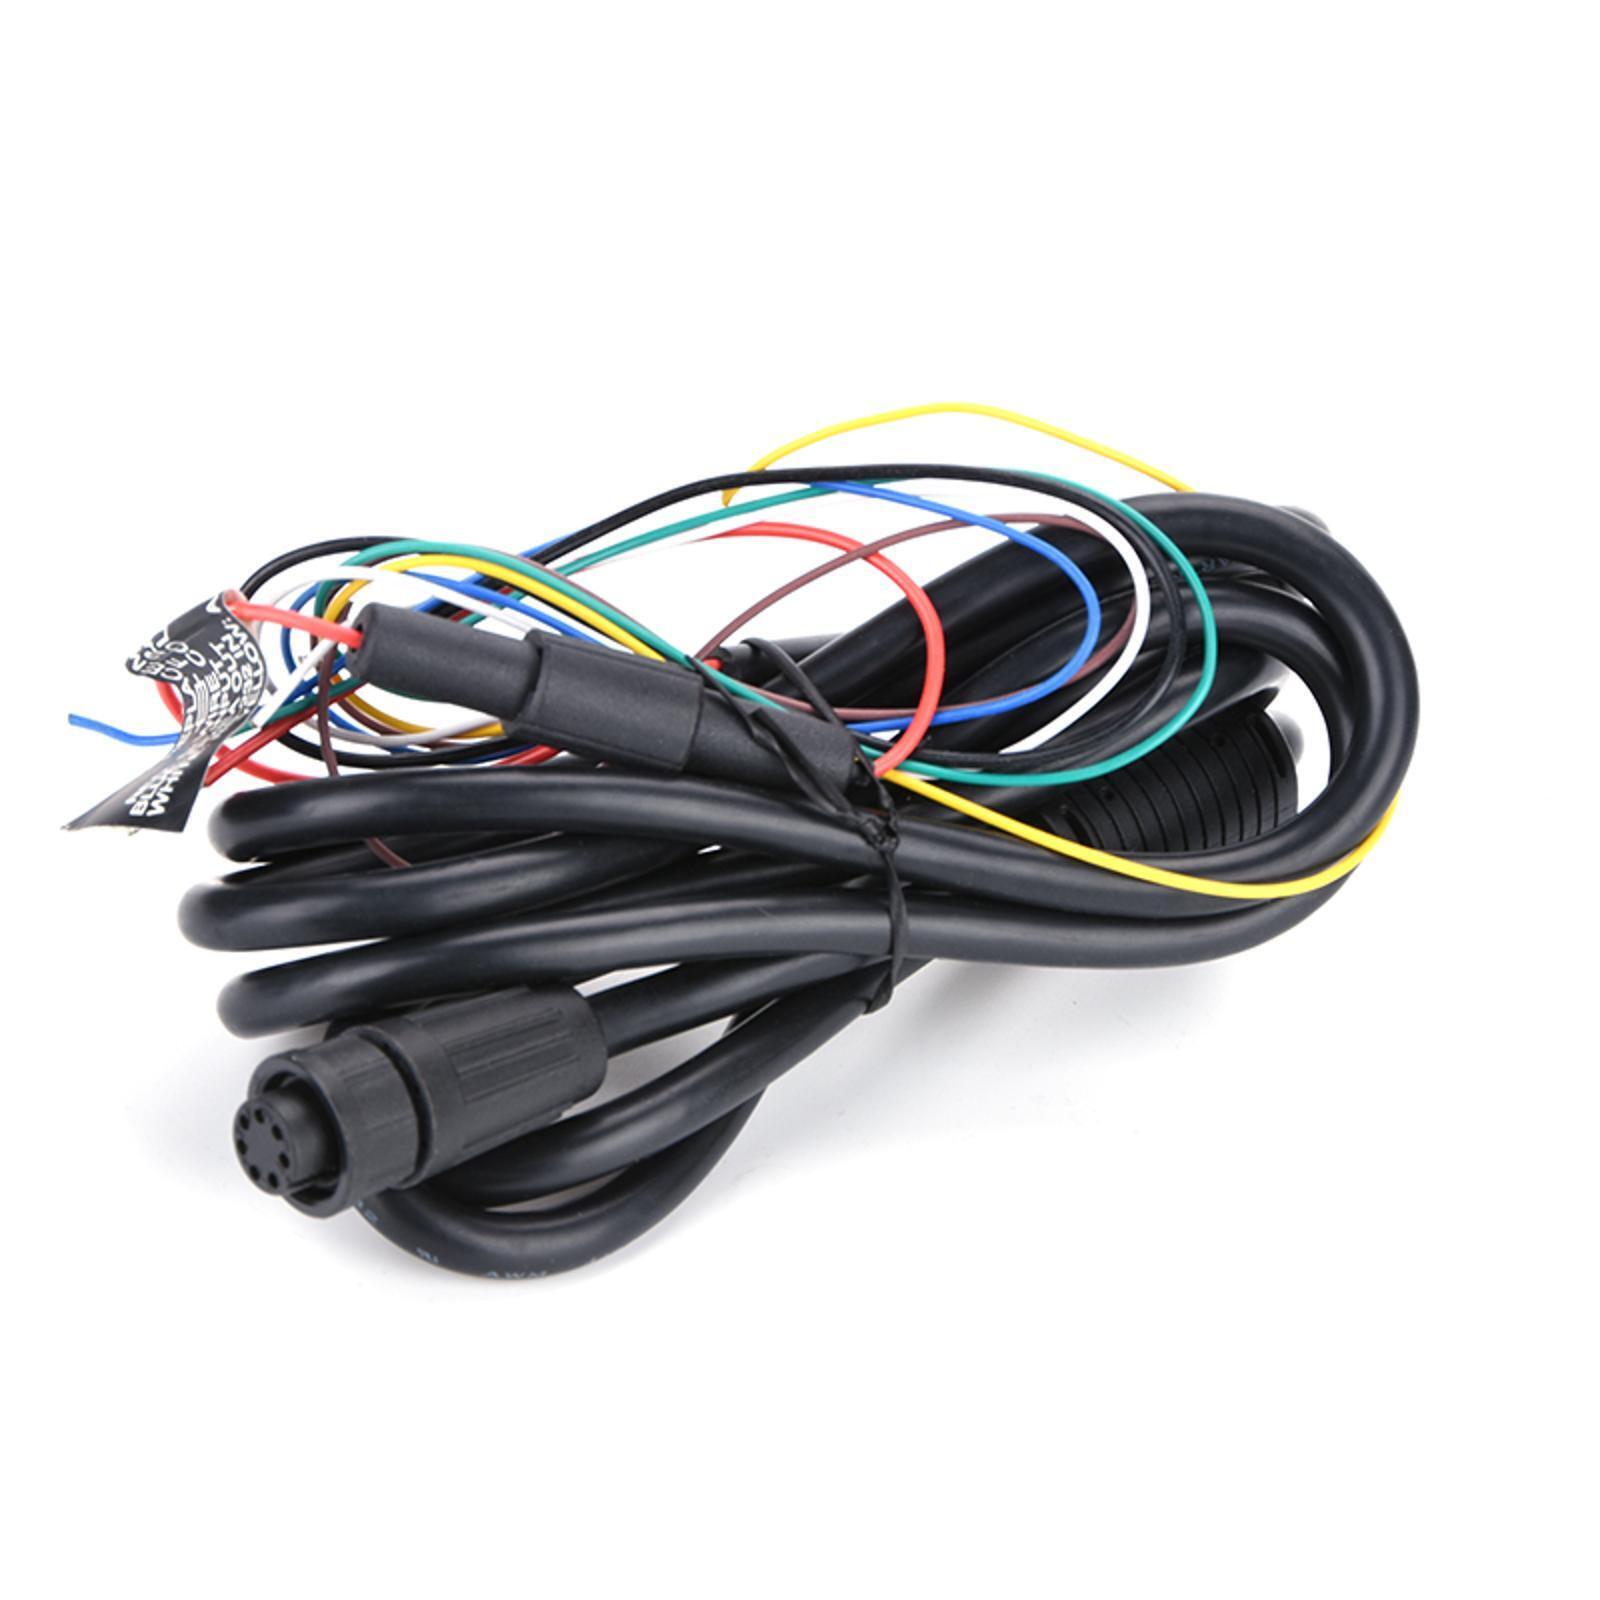 Durable 7-Pin Power Cable For GARMIN POWER CABLE GPSMAP 128 152 192C 580 GPS a